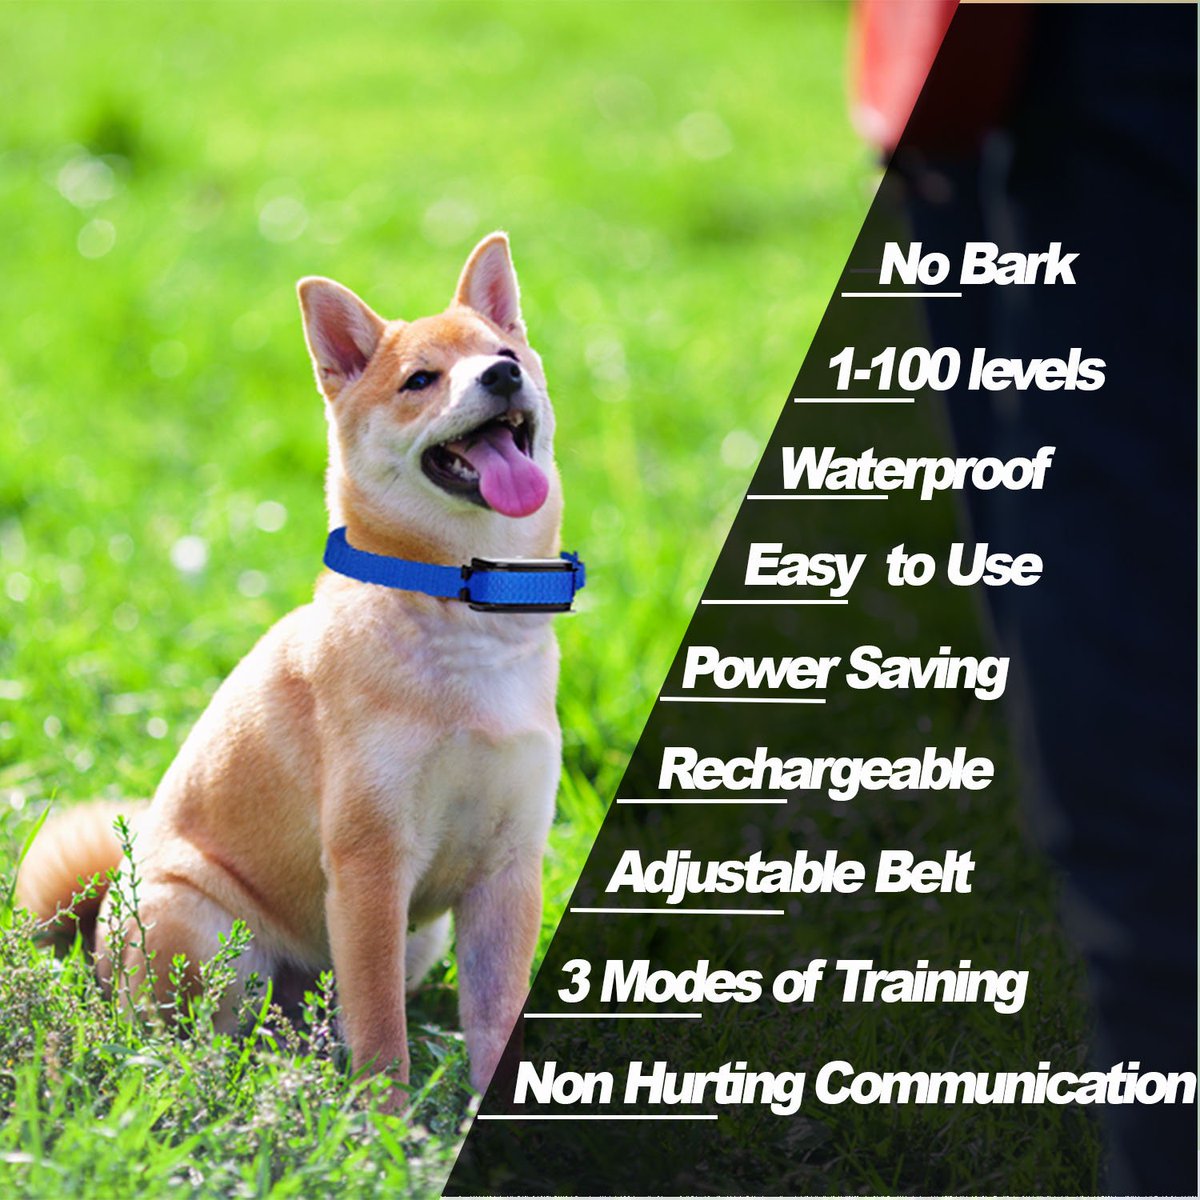 Having Behaviour Problems with your Dog?
But Can't Afford The Expensive Training?☹️
Buy Our Affordable And Effective Training Collar From Here  amzn.to/2GvF8zc  
Because Training is your Dog's Right
#DogTraining #barkcollar #dogtrainingtips #dogsoftwitter #doglovers